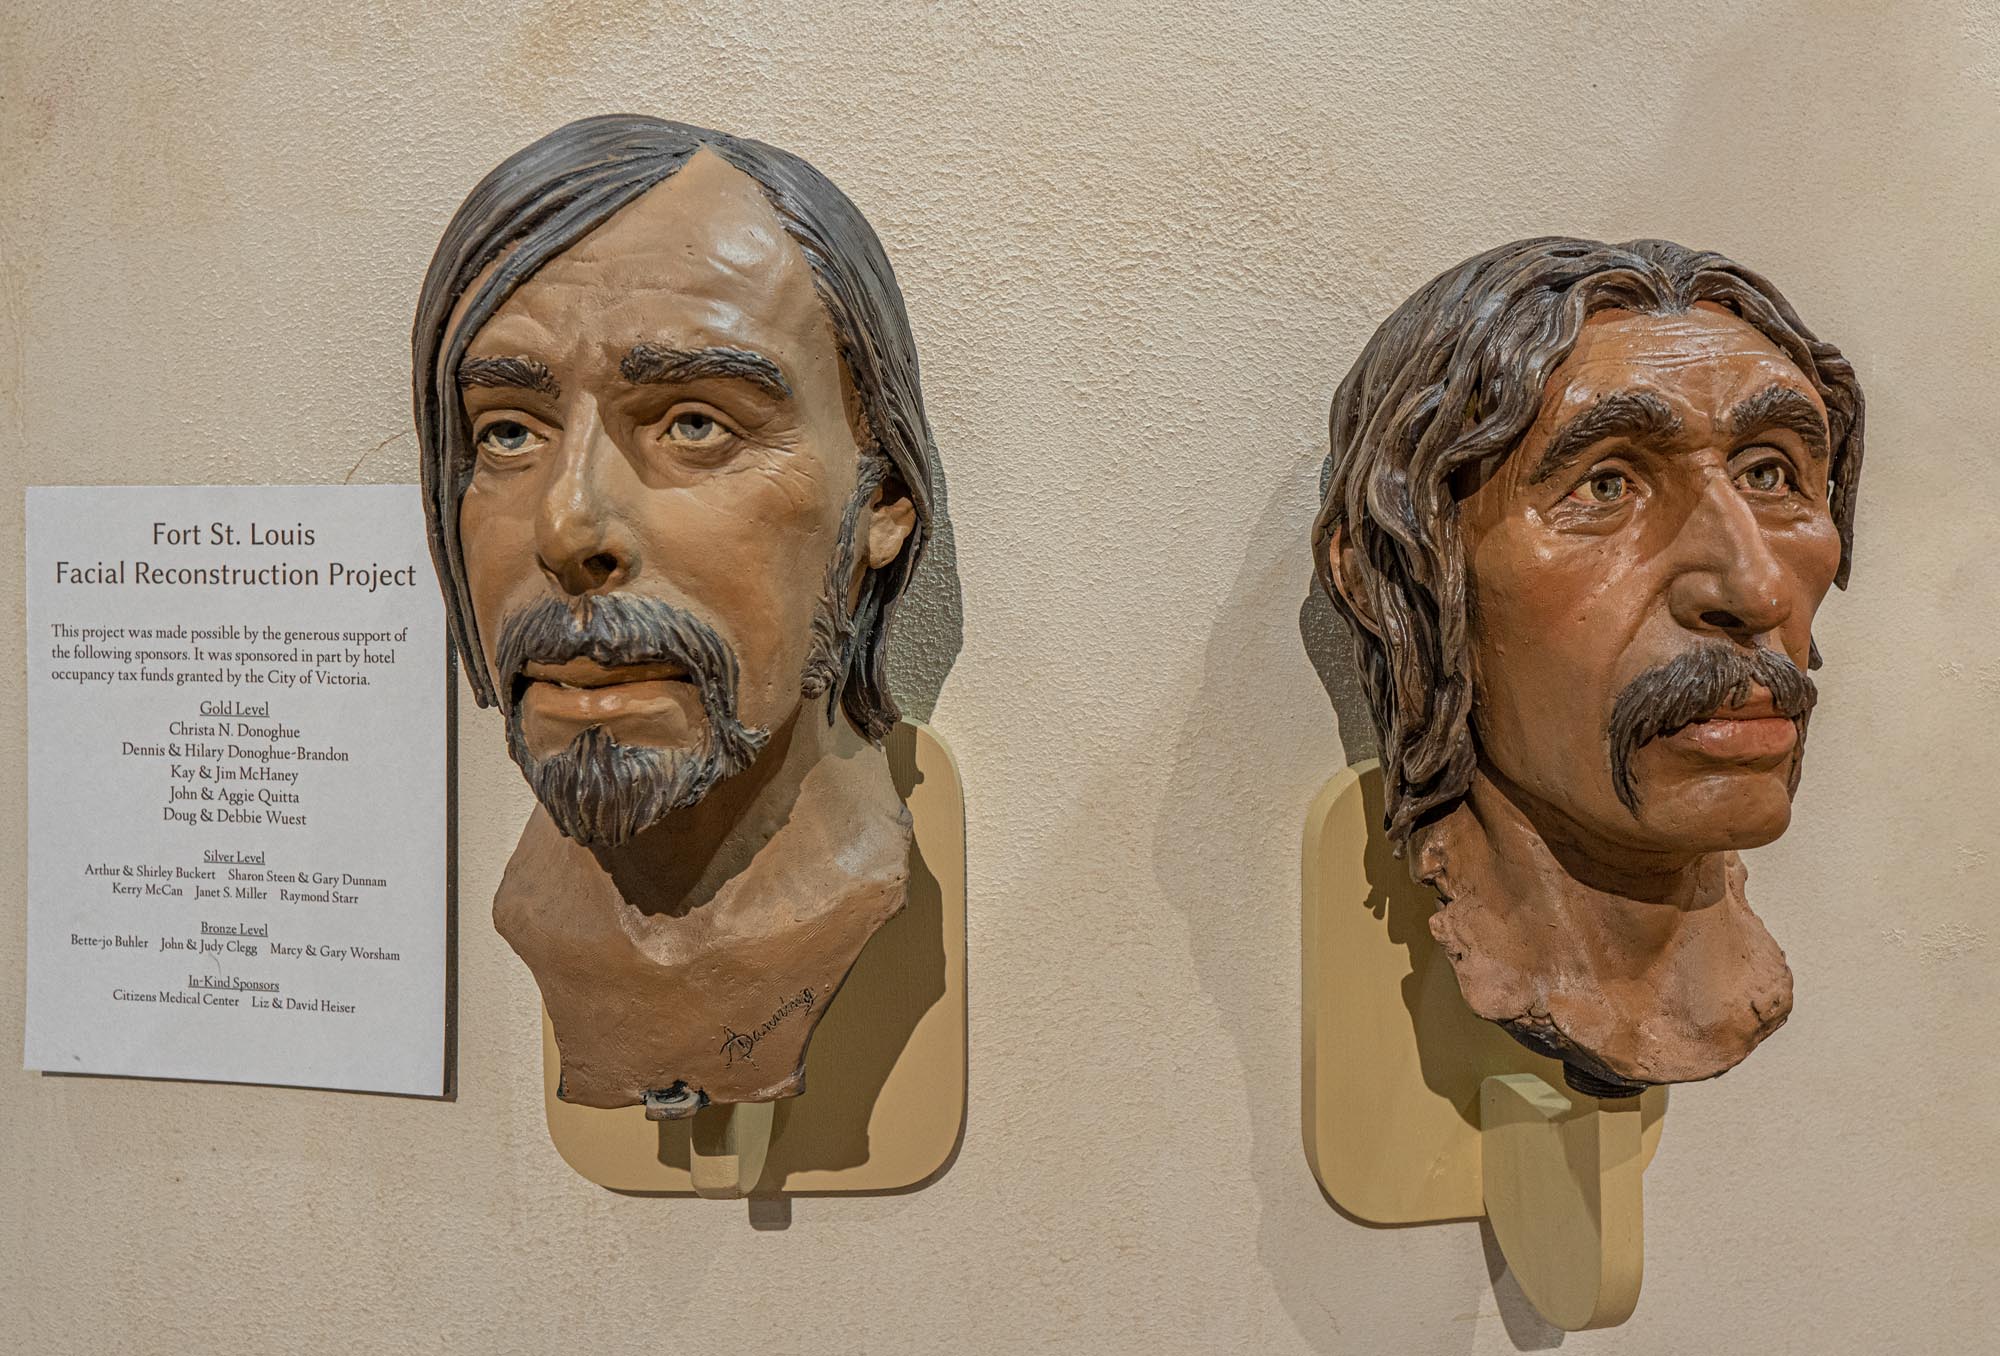 Over 300 years after their deaths, one can see the faces of two French colonists, the Sieur de Marle (right) and the Marquis de Sablonniere (left) at the Museum of the Coastal Bend.